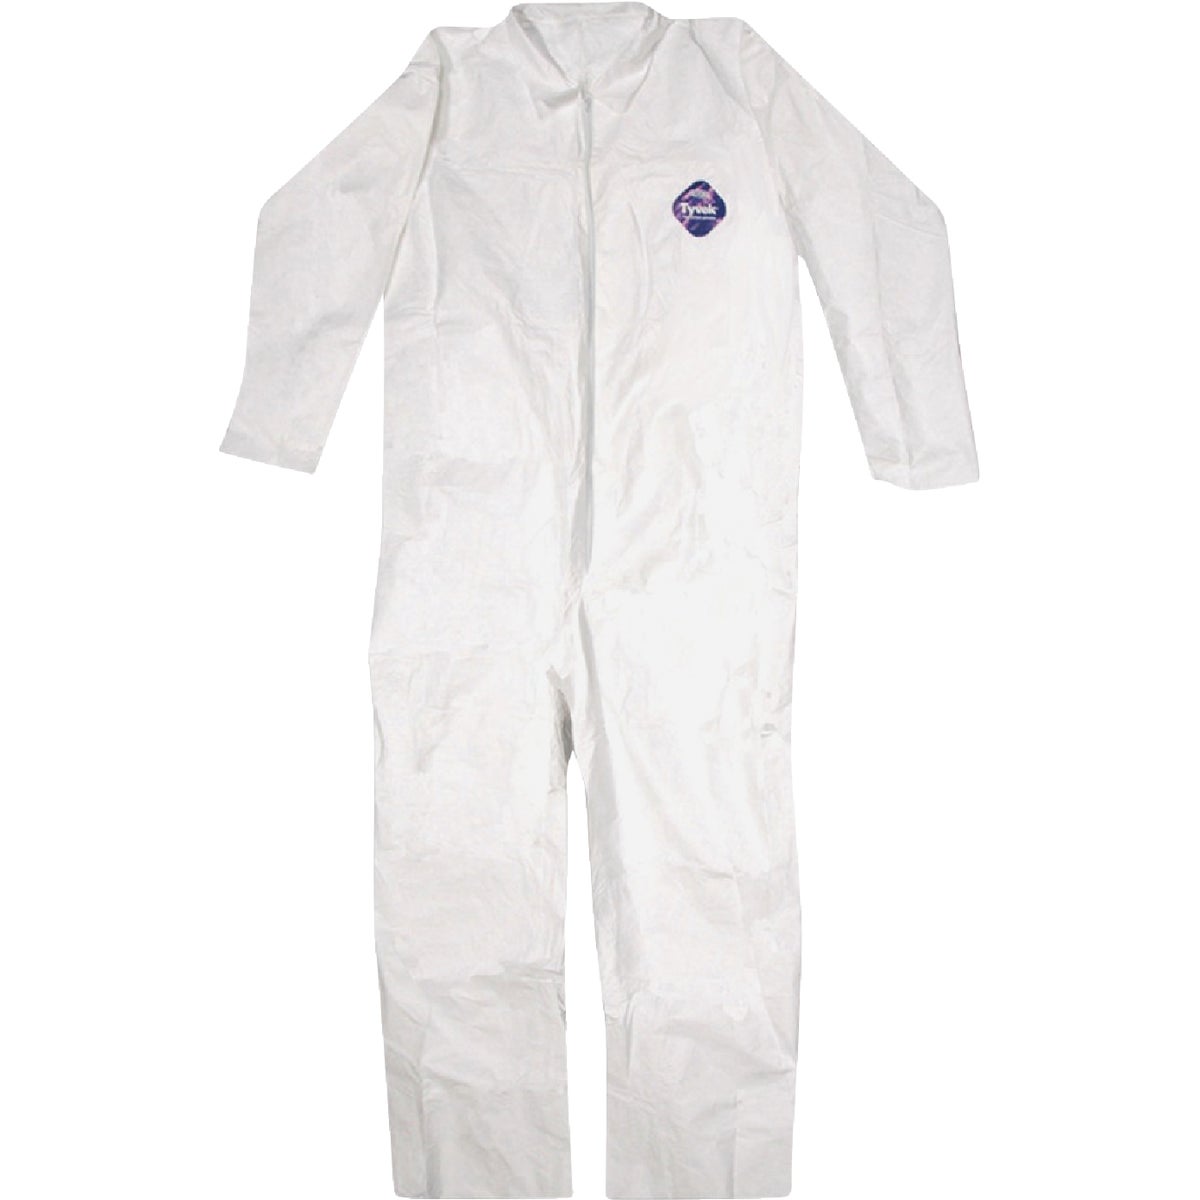 Trimaco Tyvek Large Reusable Painter's Coveralls